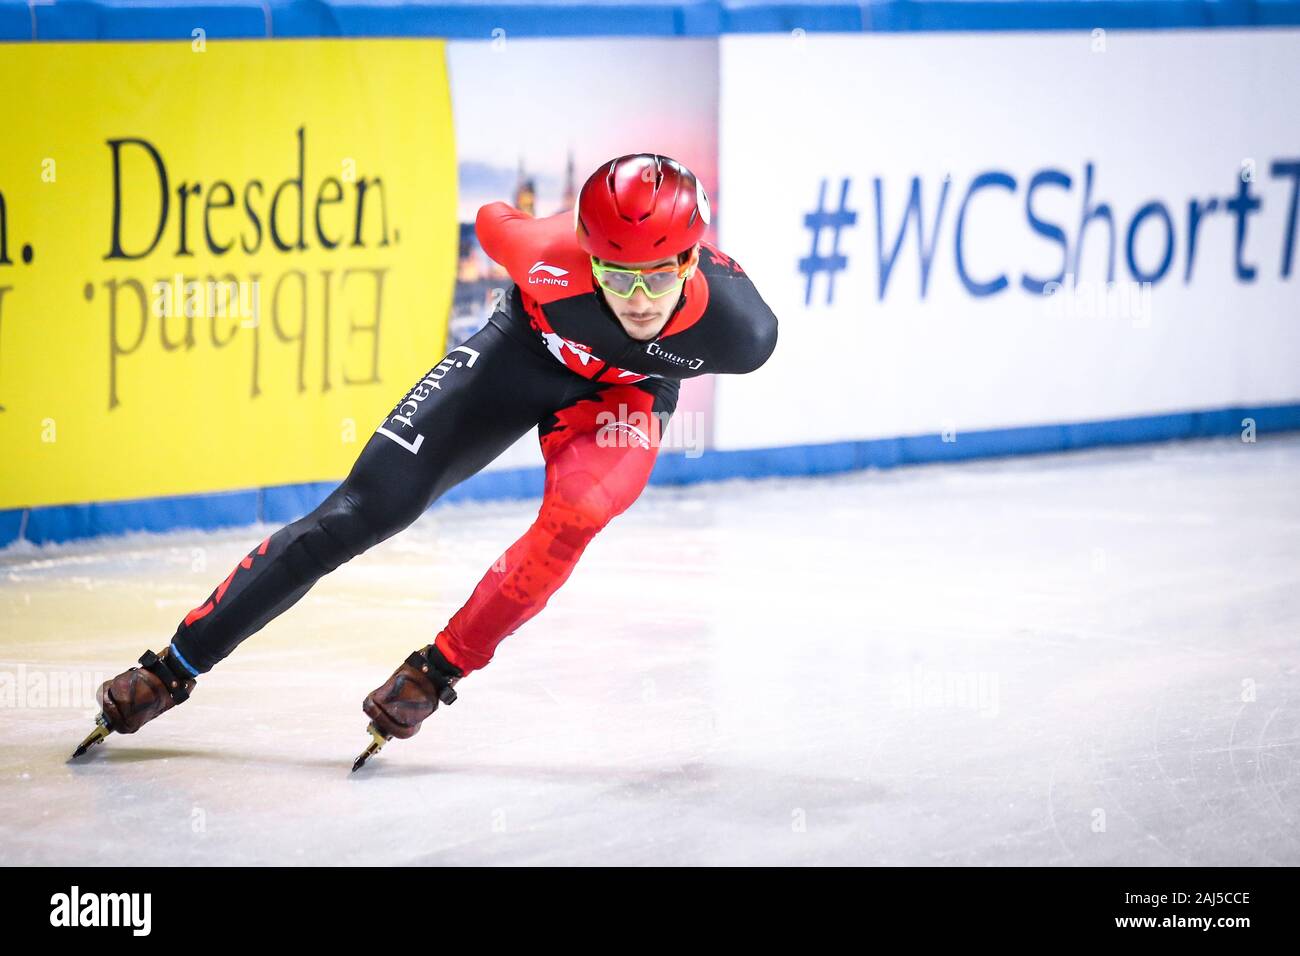 Dresden, Germany, February 02, 2019: Samuel Girard of Canada competes during the ISU Short Track Speed Skating World Cup Stock Photo